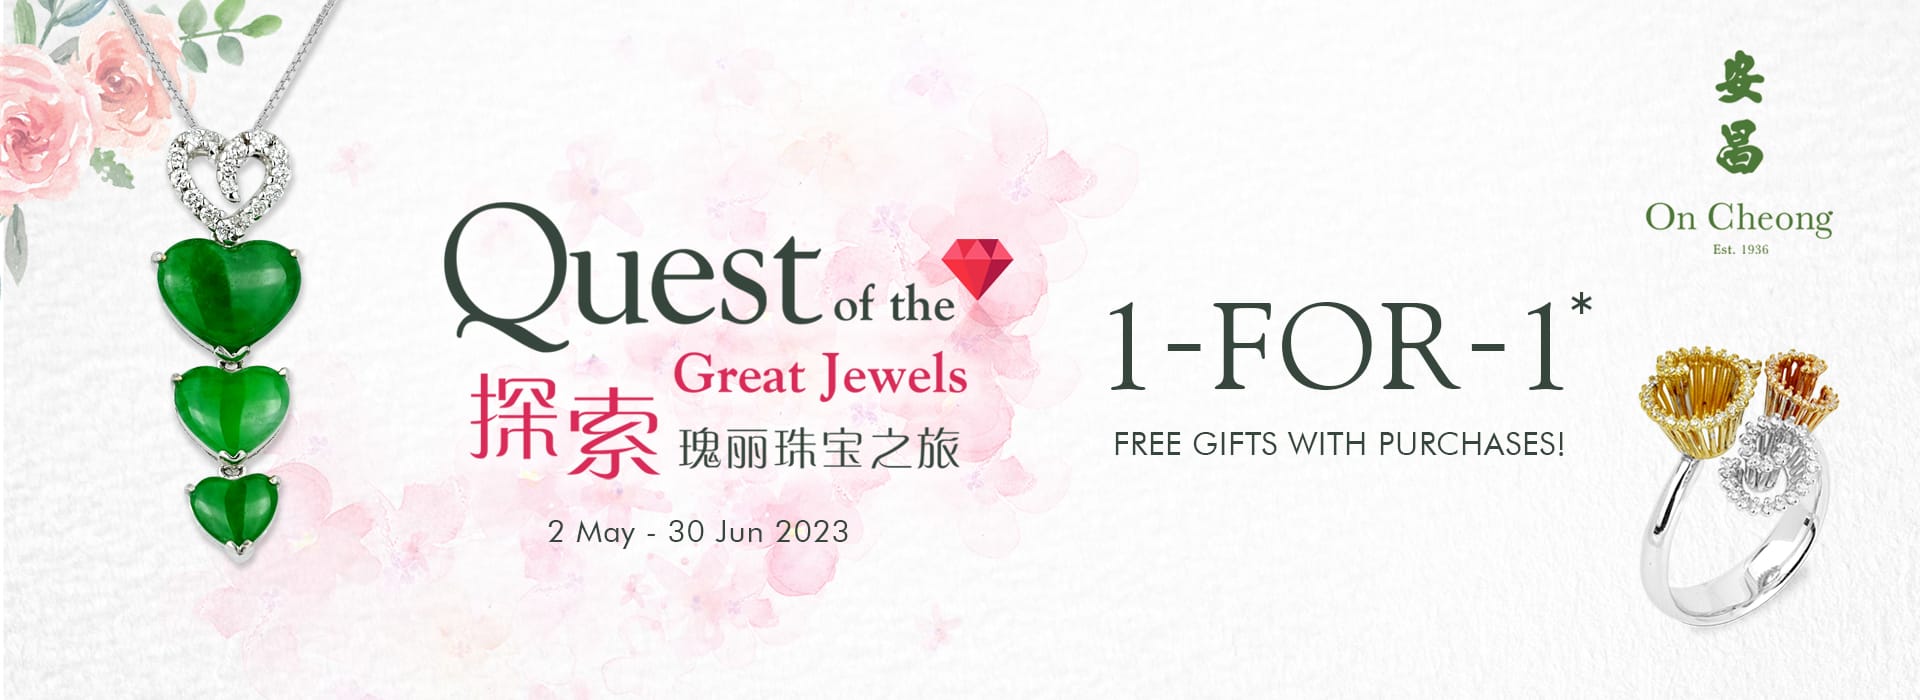 On Cheong Quest of the Great Jewels